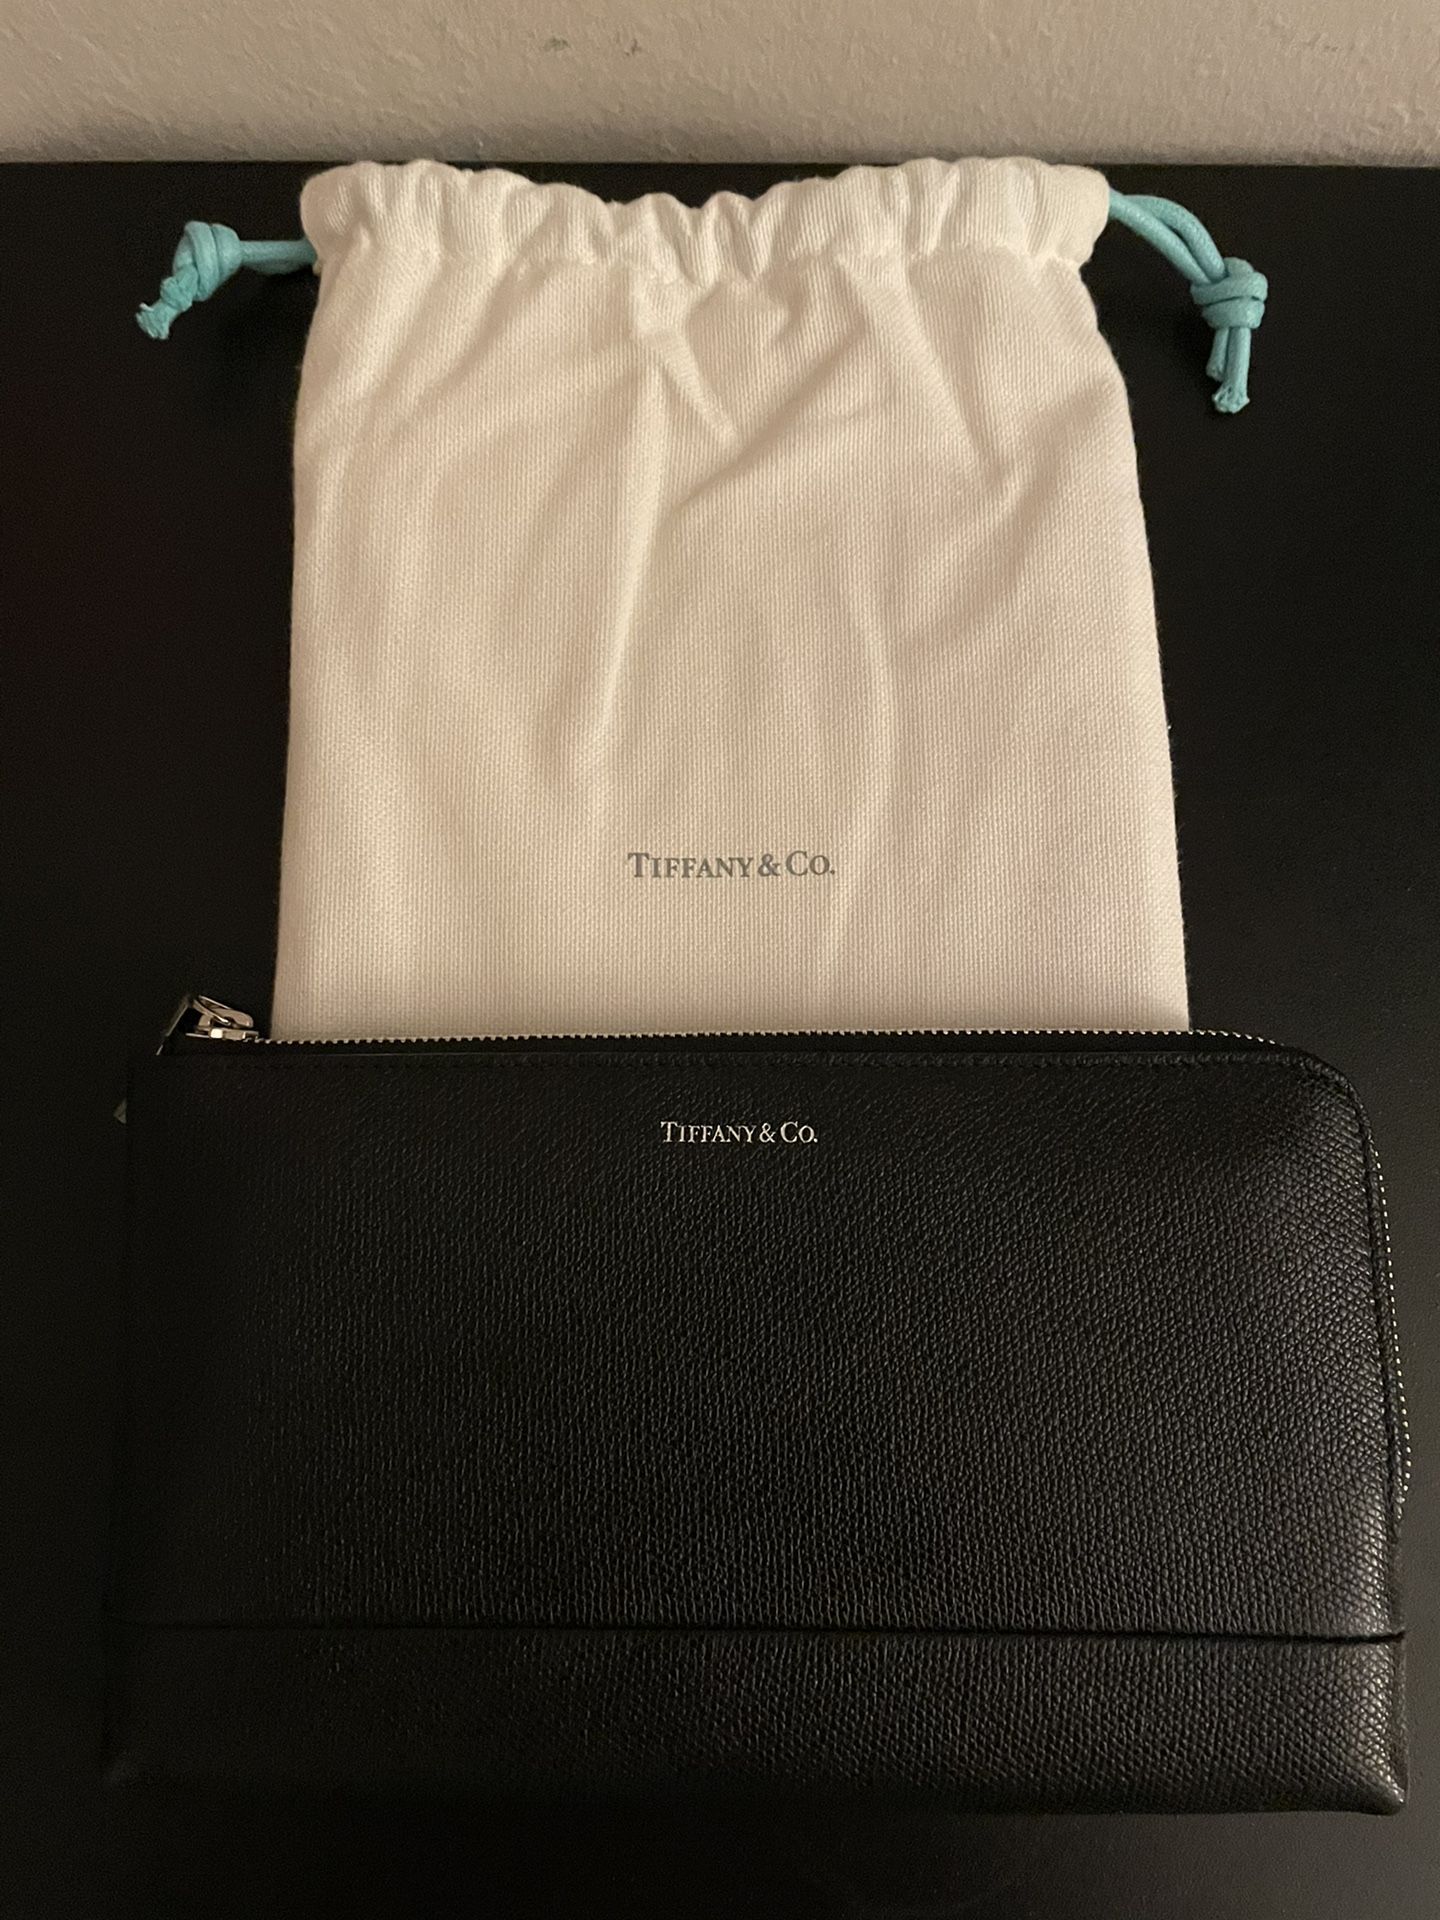 Tiffany And Co Wallet